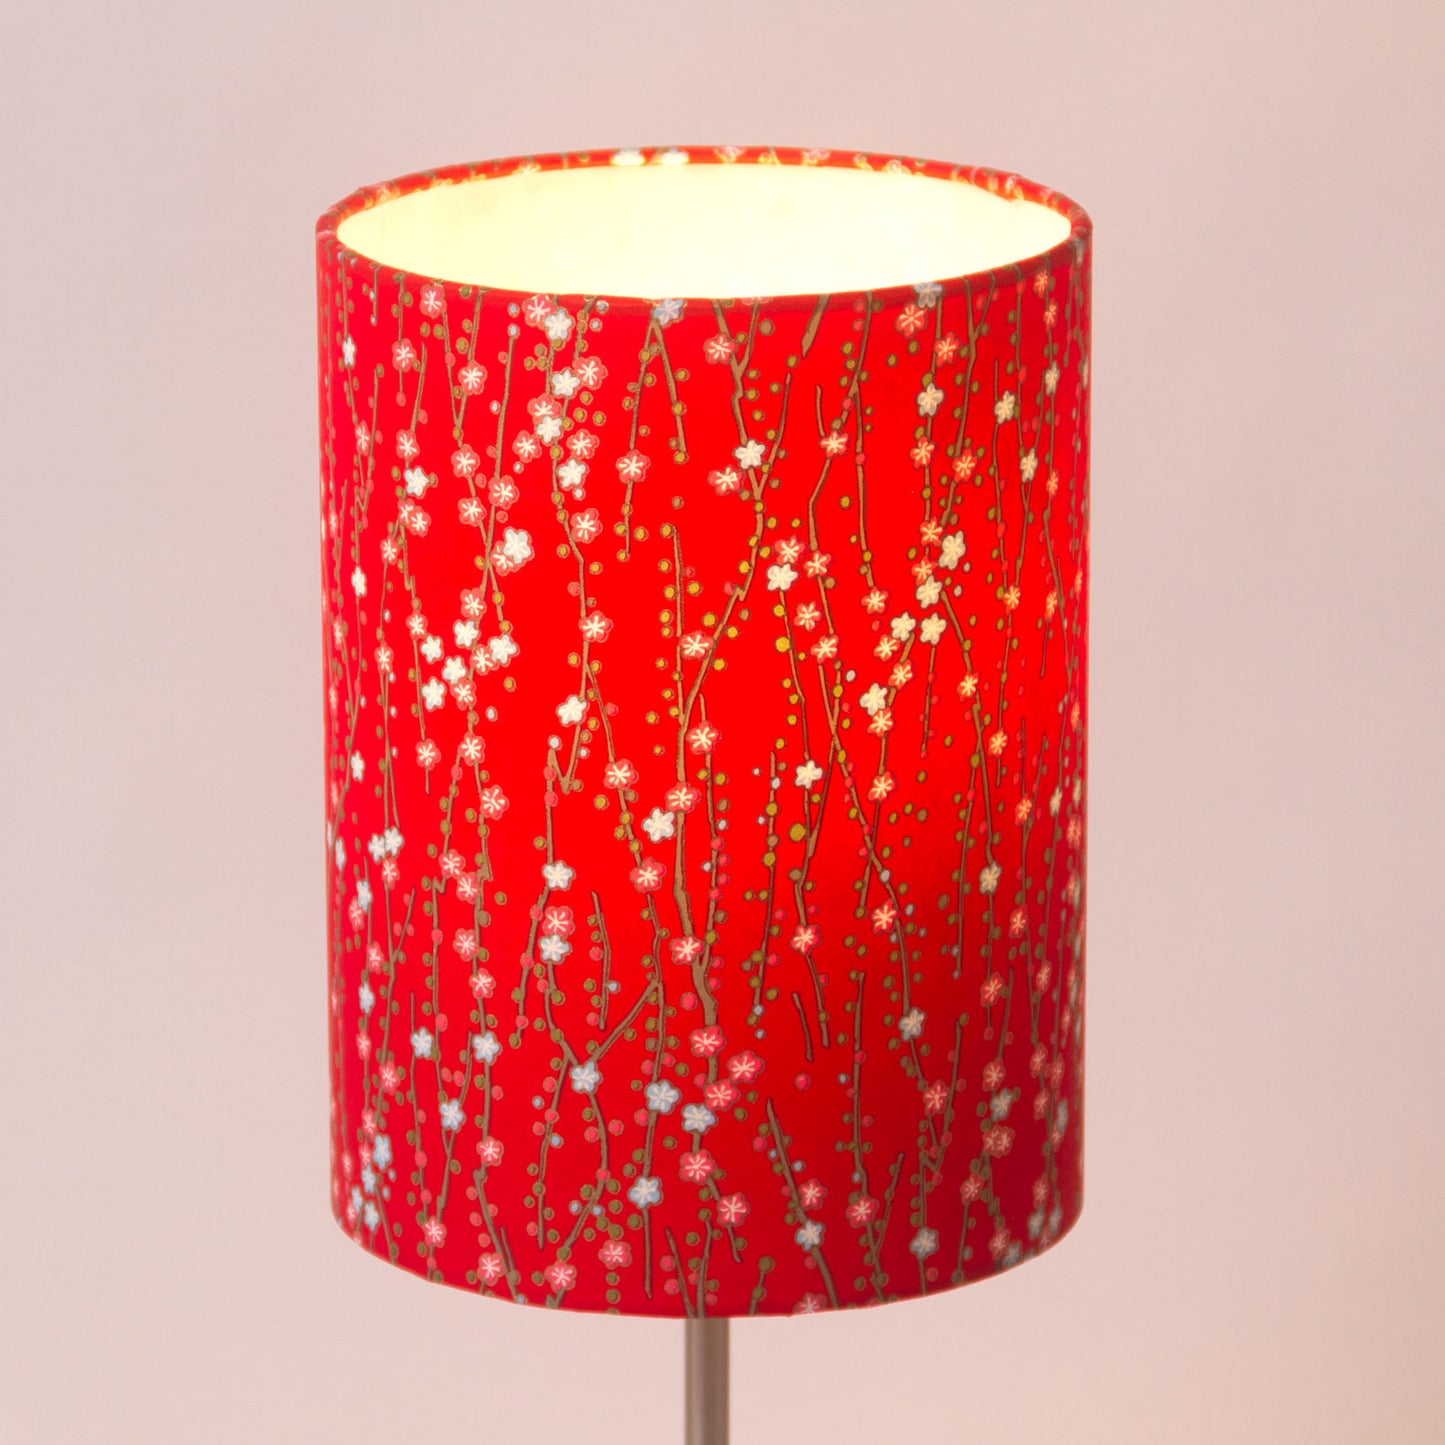 Square Lamp Shade - W01 ~ Red Daisies, 30cm(w) x 30cm(h) x 30cm(d)